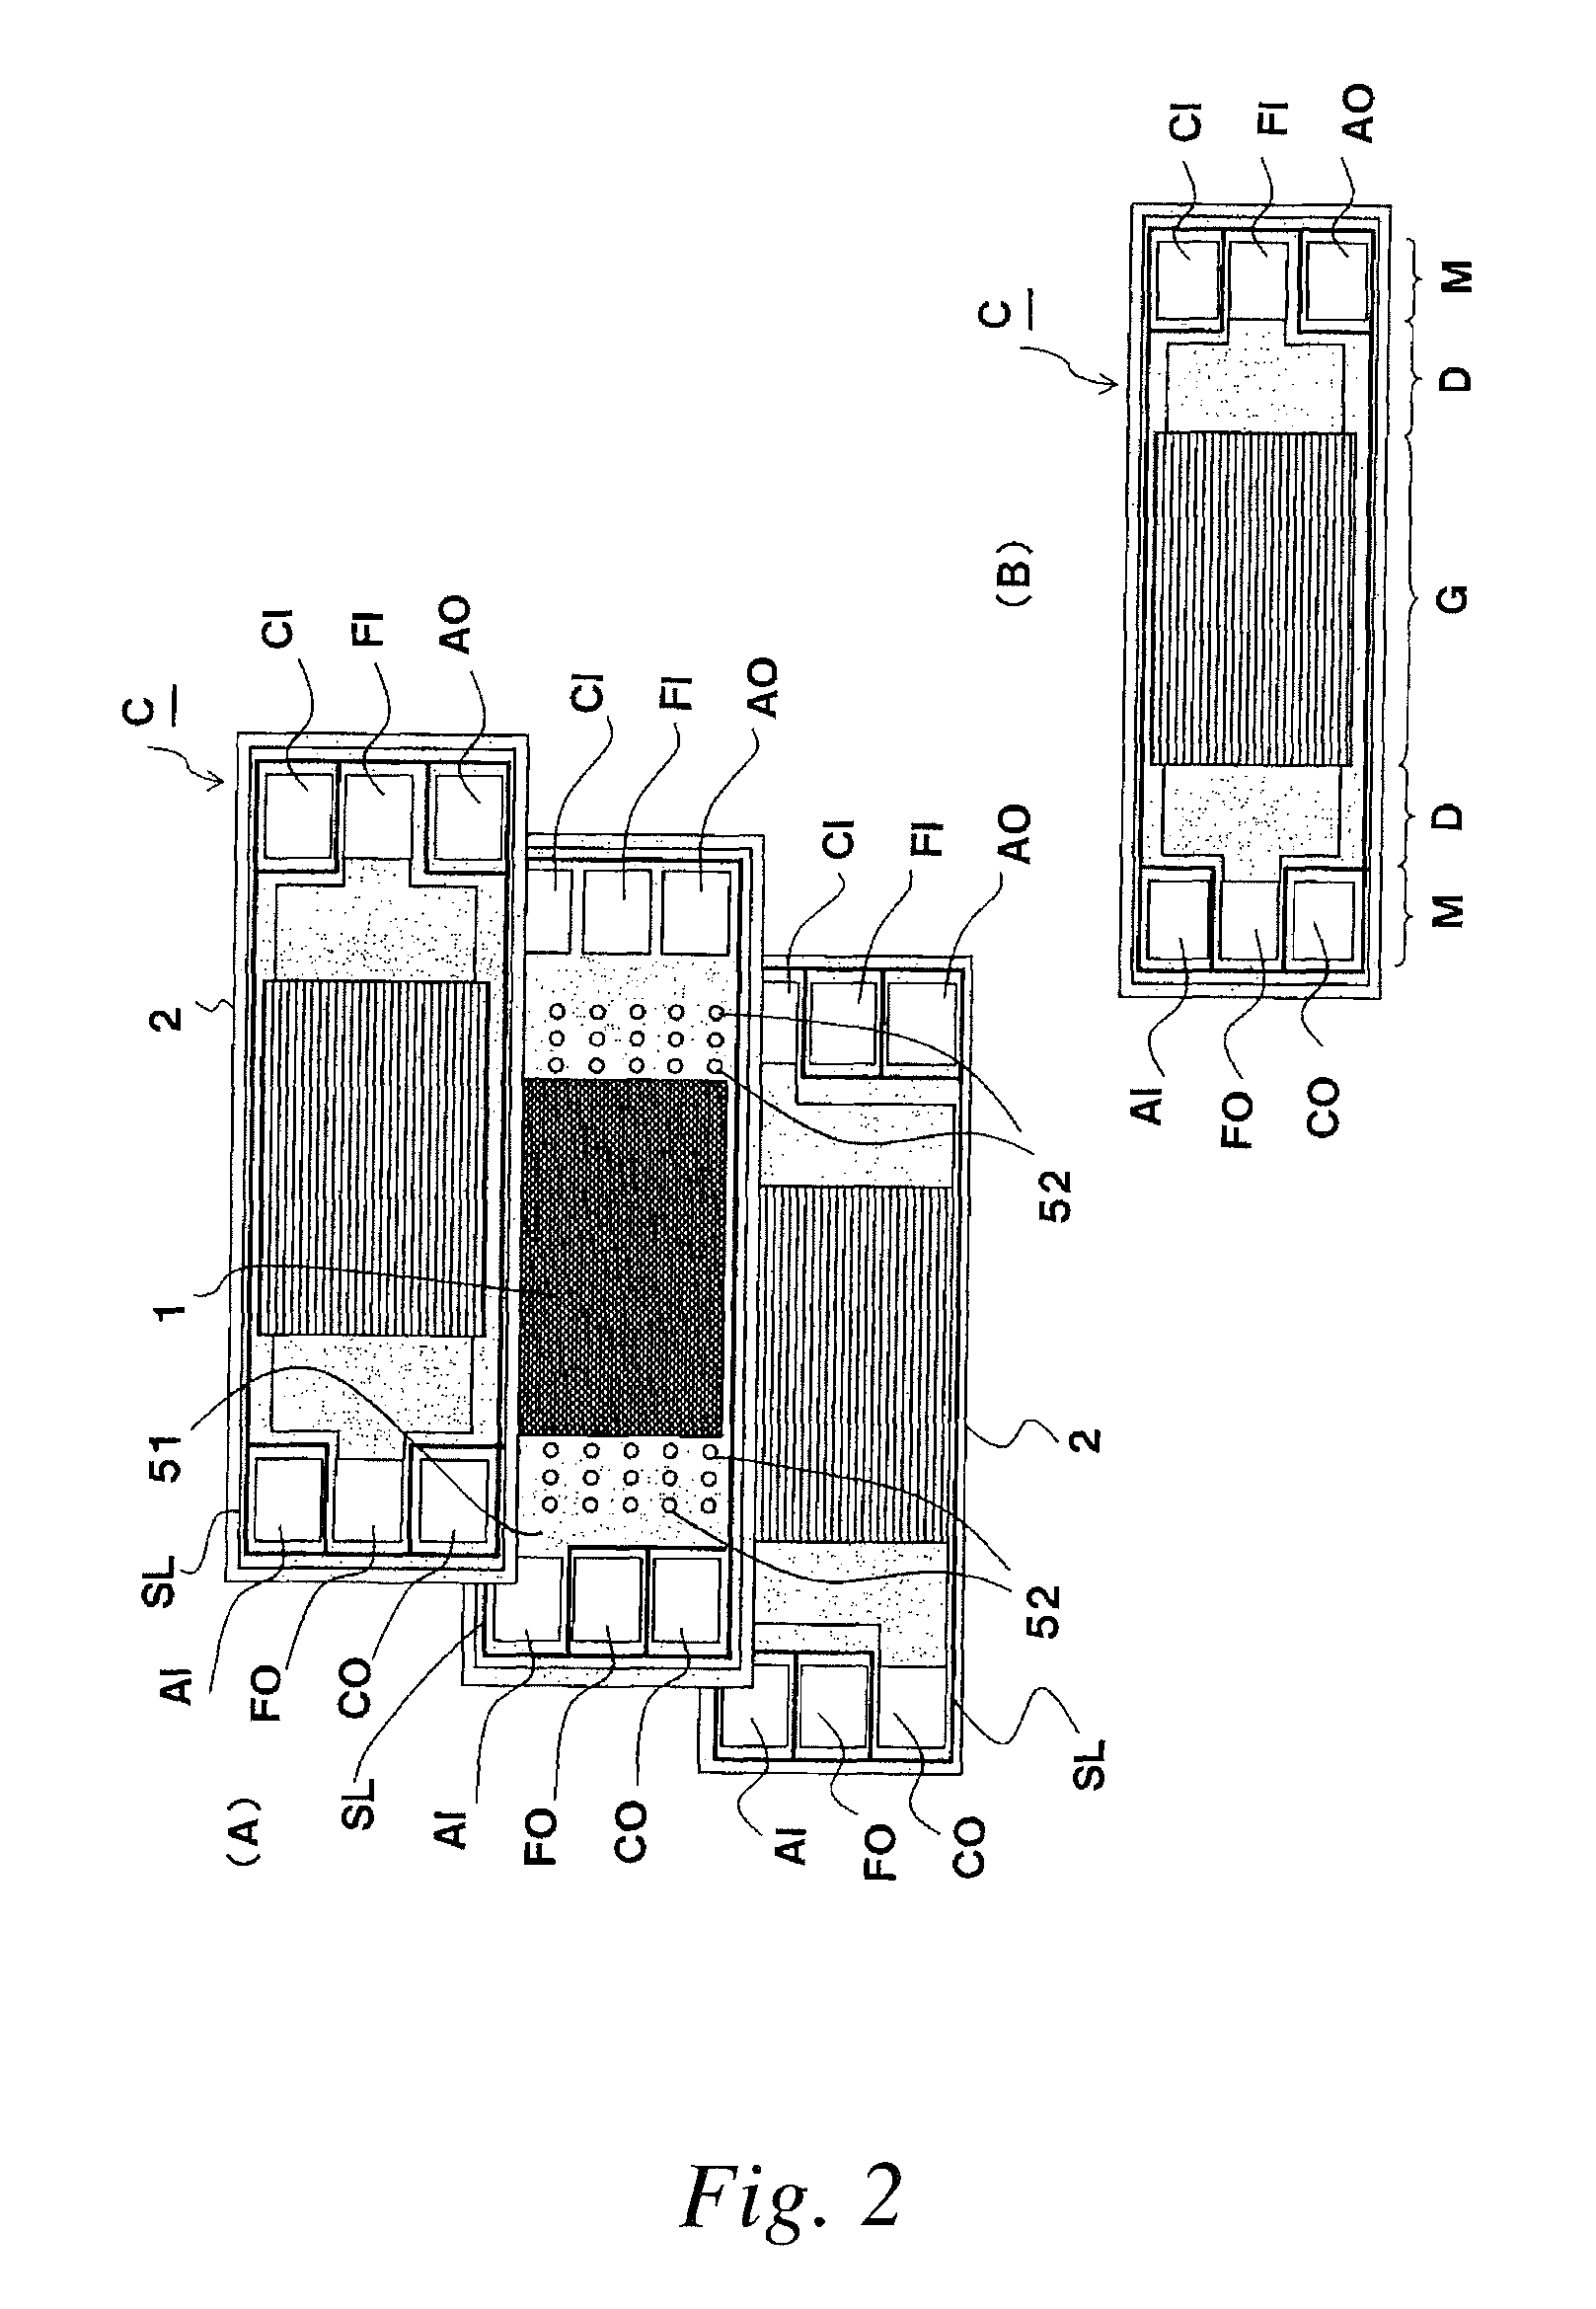 Electrode assembly for solid polymer fuel cell